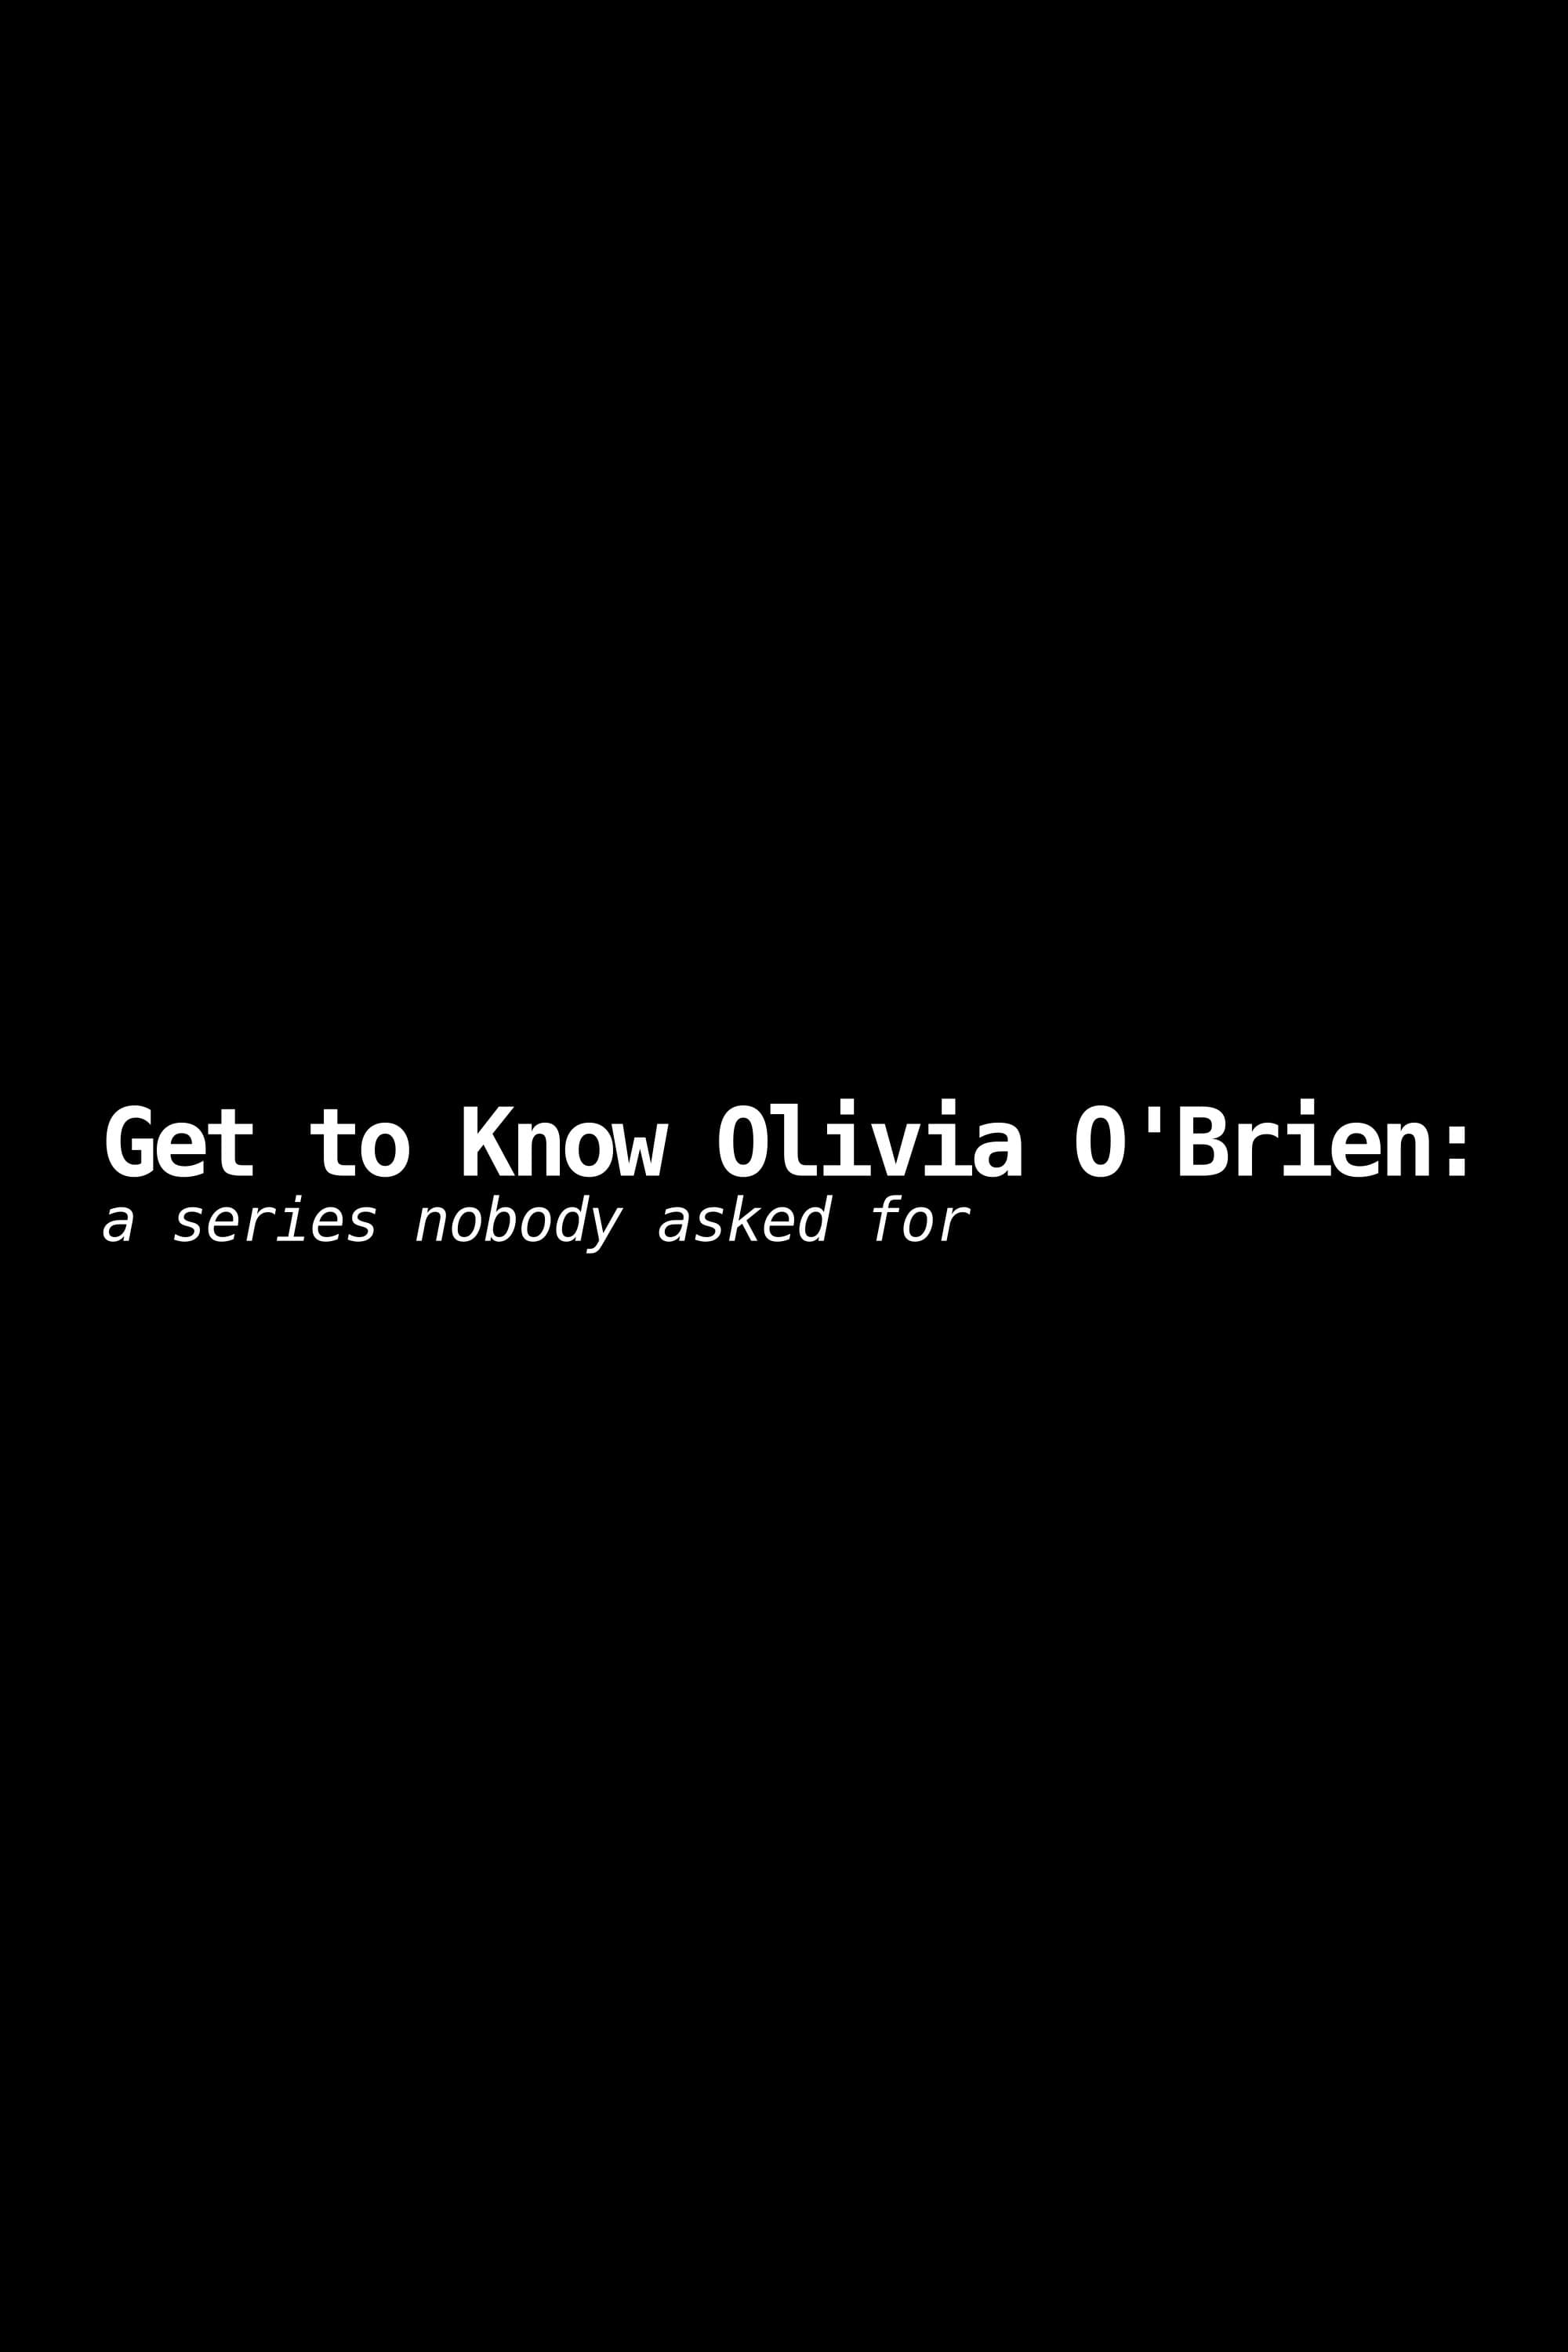 Get to Know Olivia O'Brien: A Series Nobody Asked For